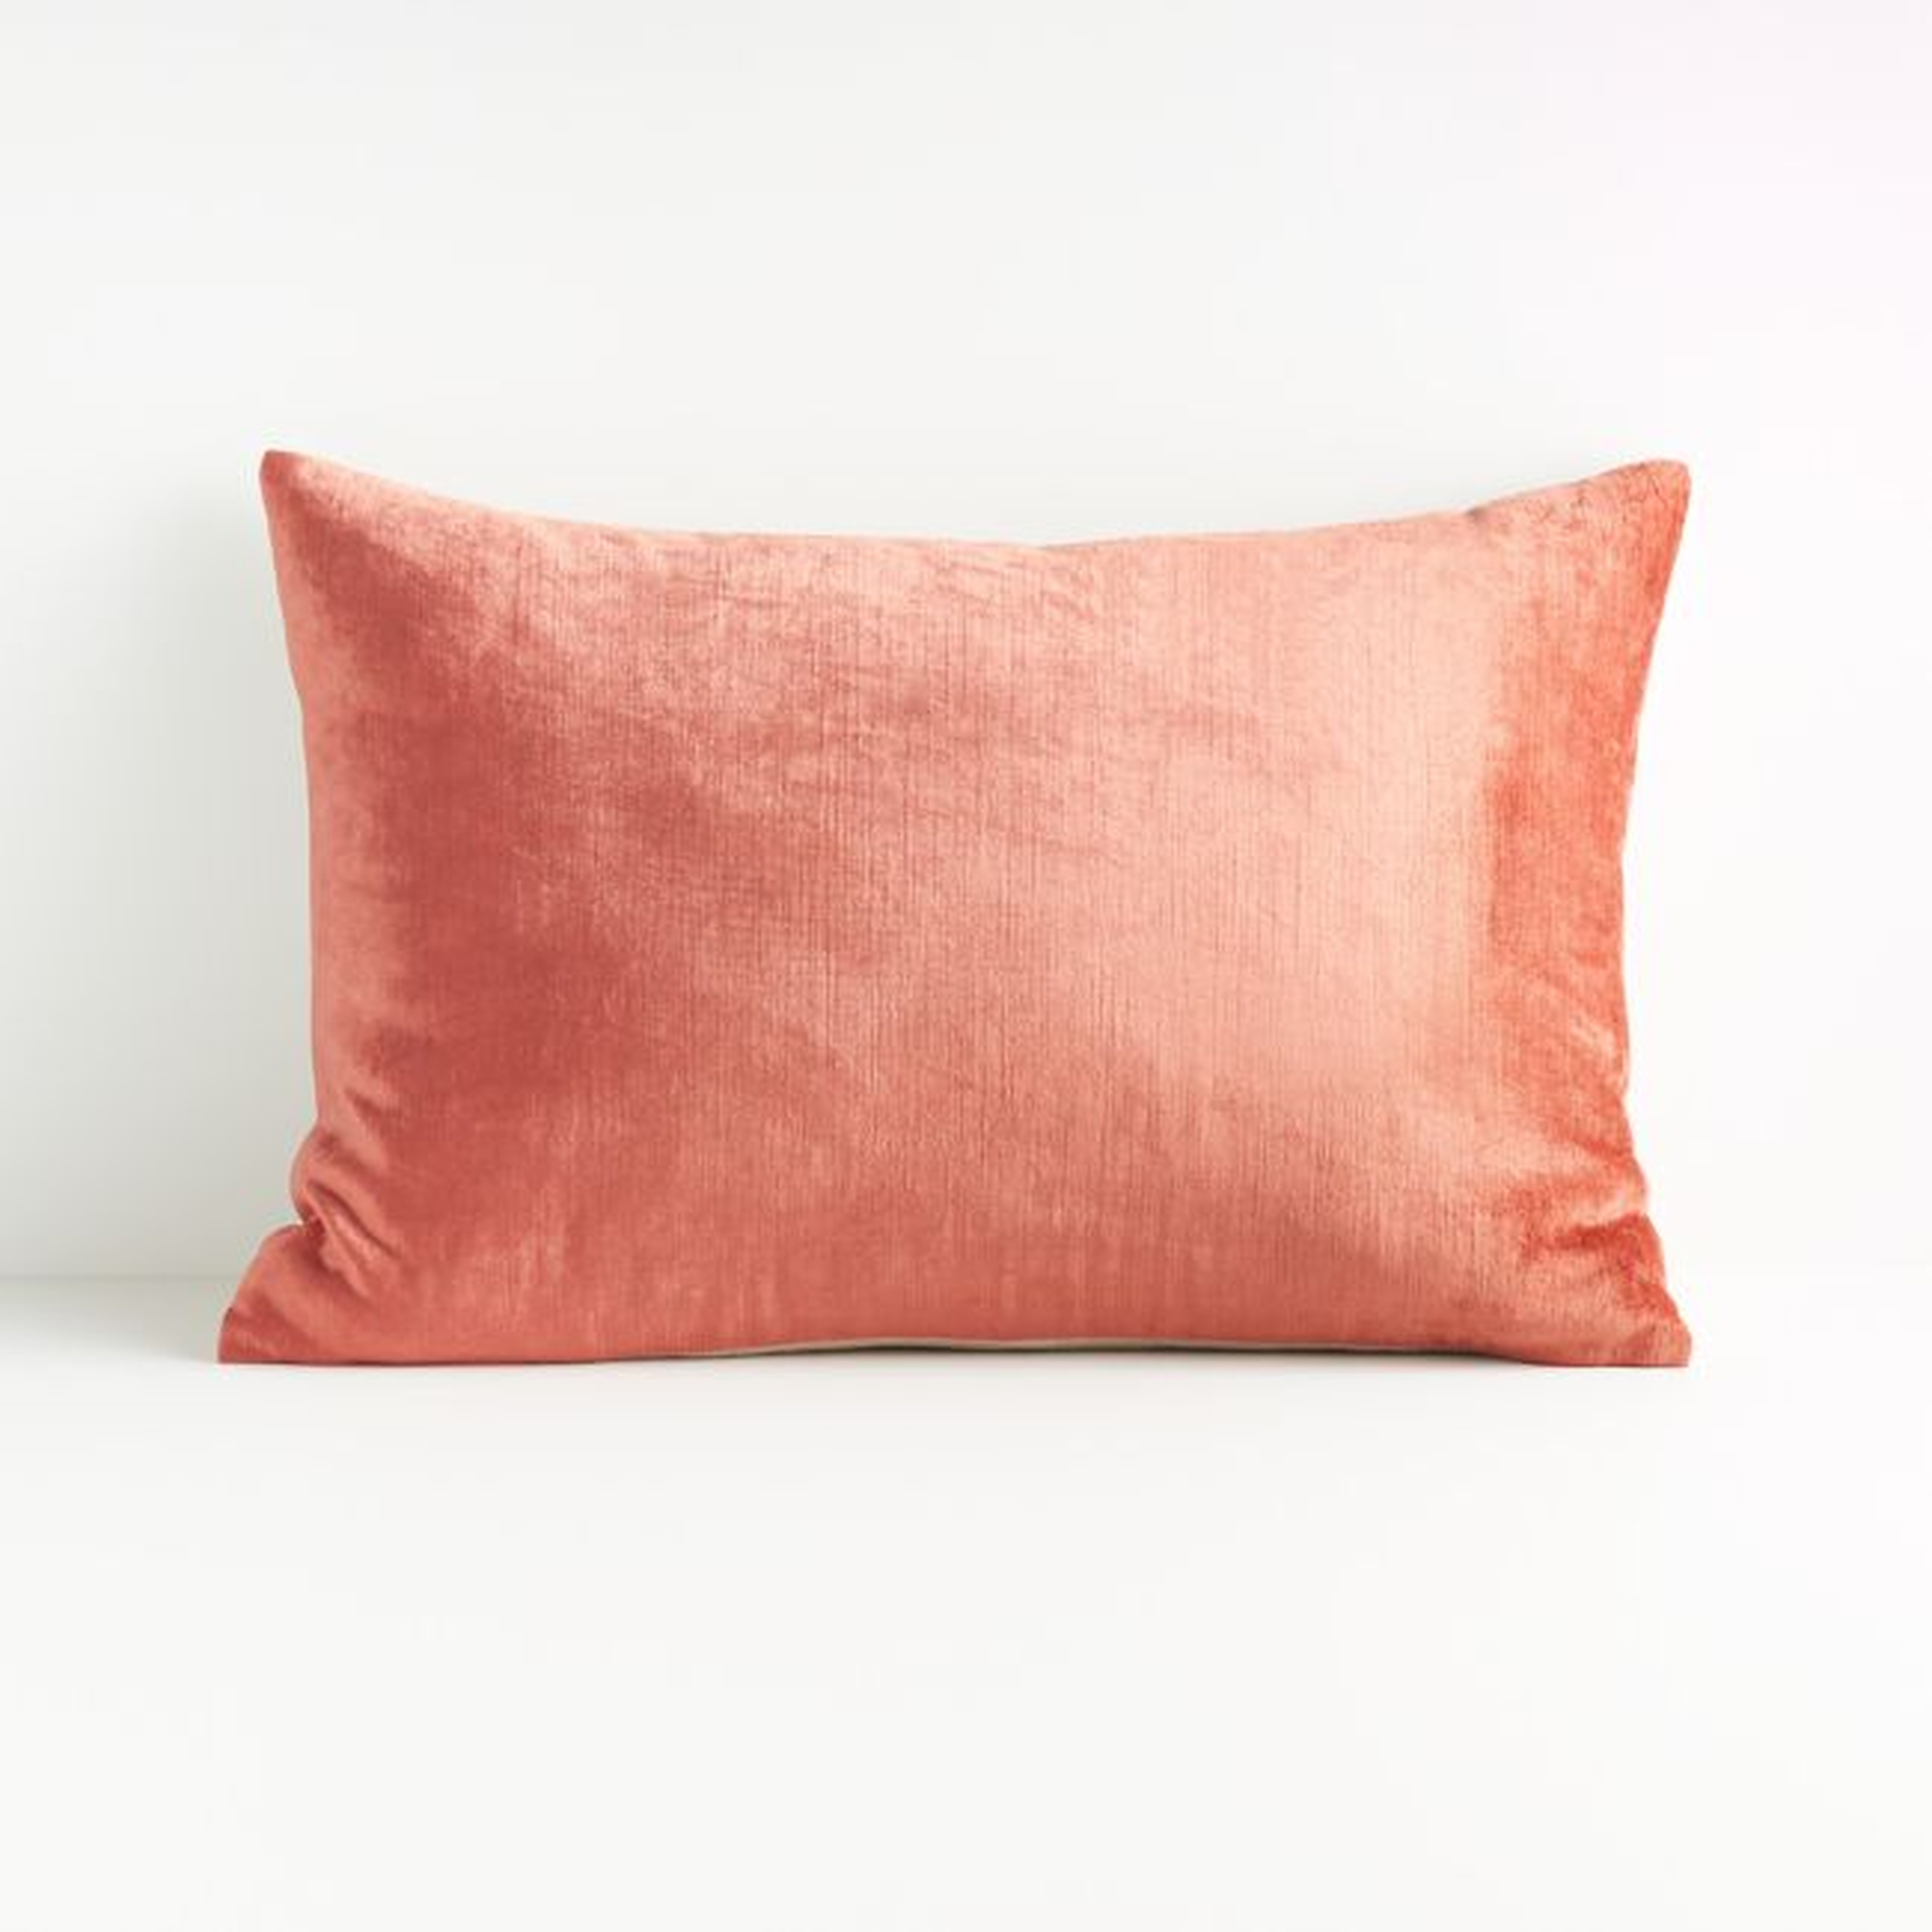 Viva Clay 22"x15" Crushed Velvet Pillow - Crate and Barrel